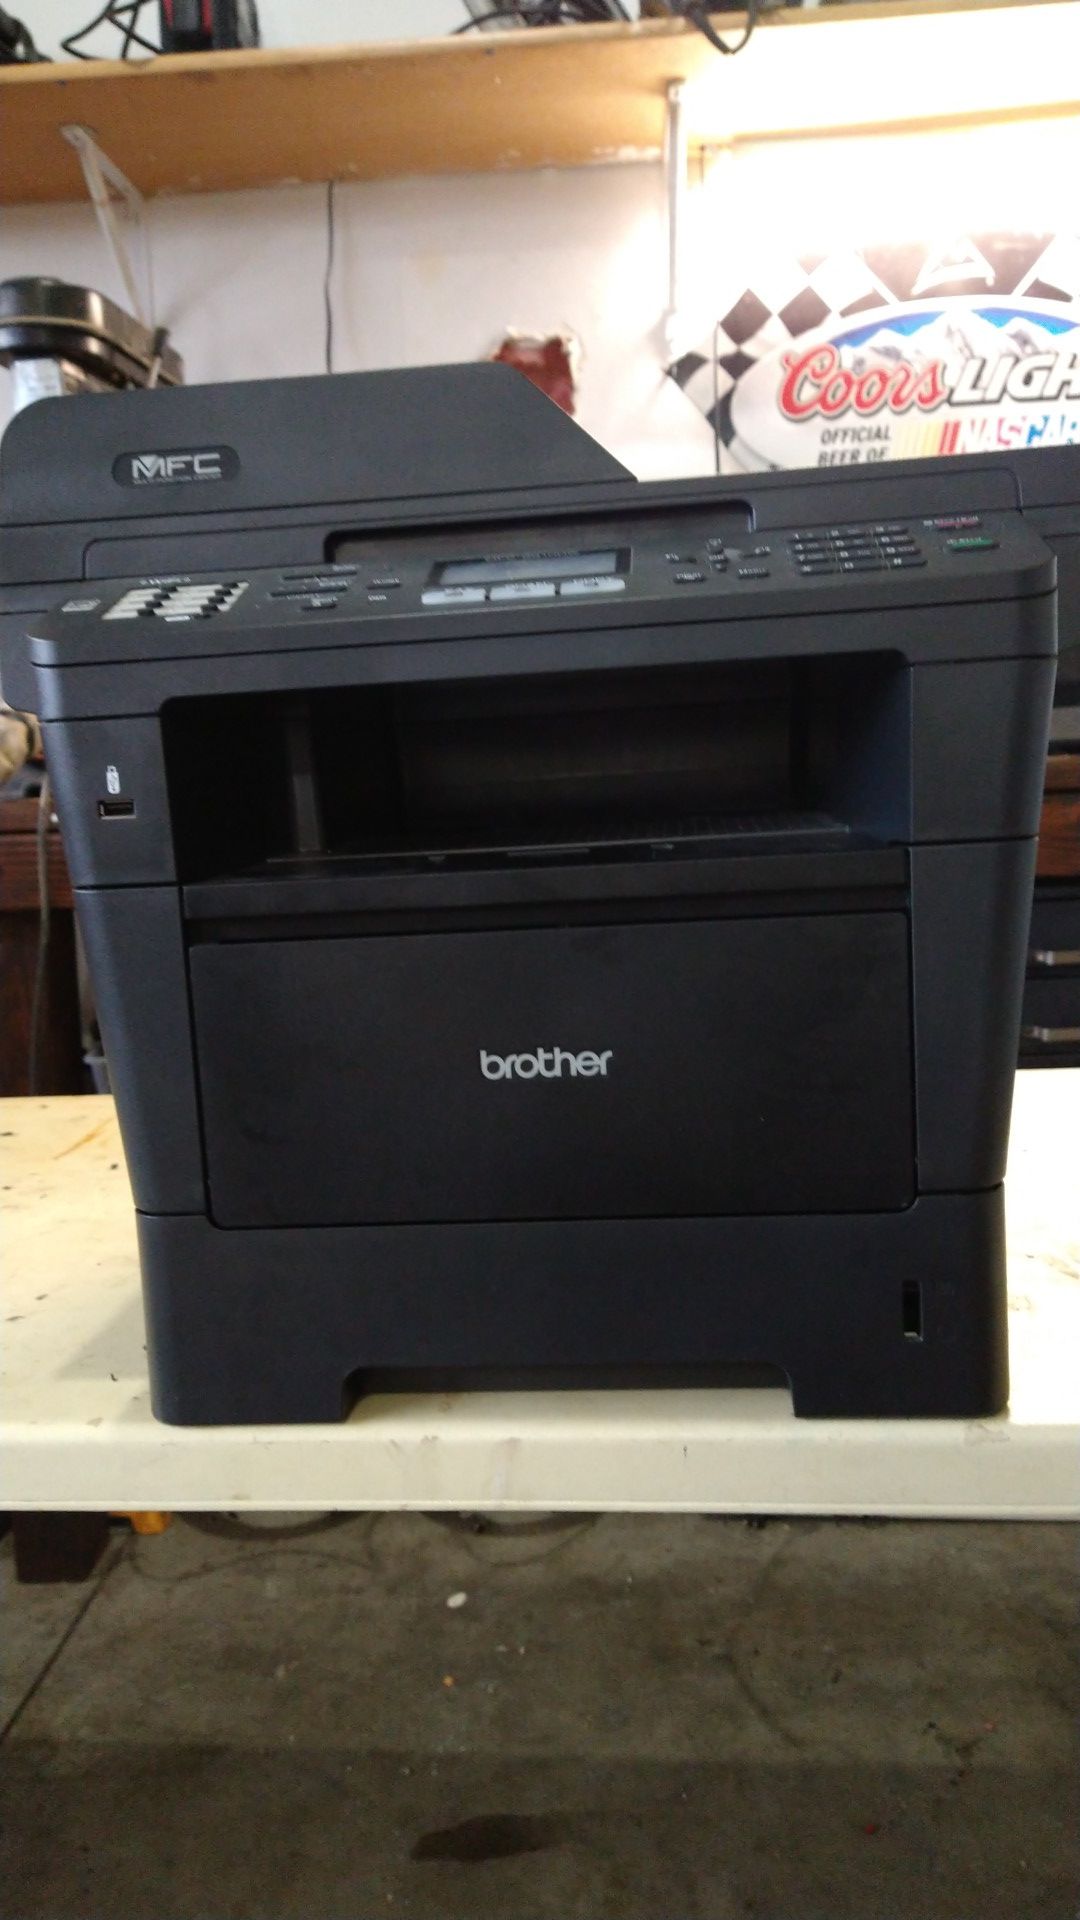 Mfc Brothers laser printer scanner fax all in one